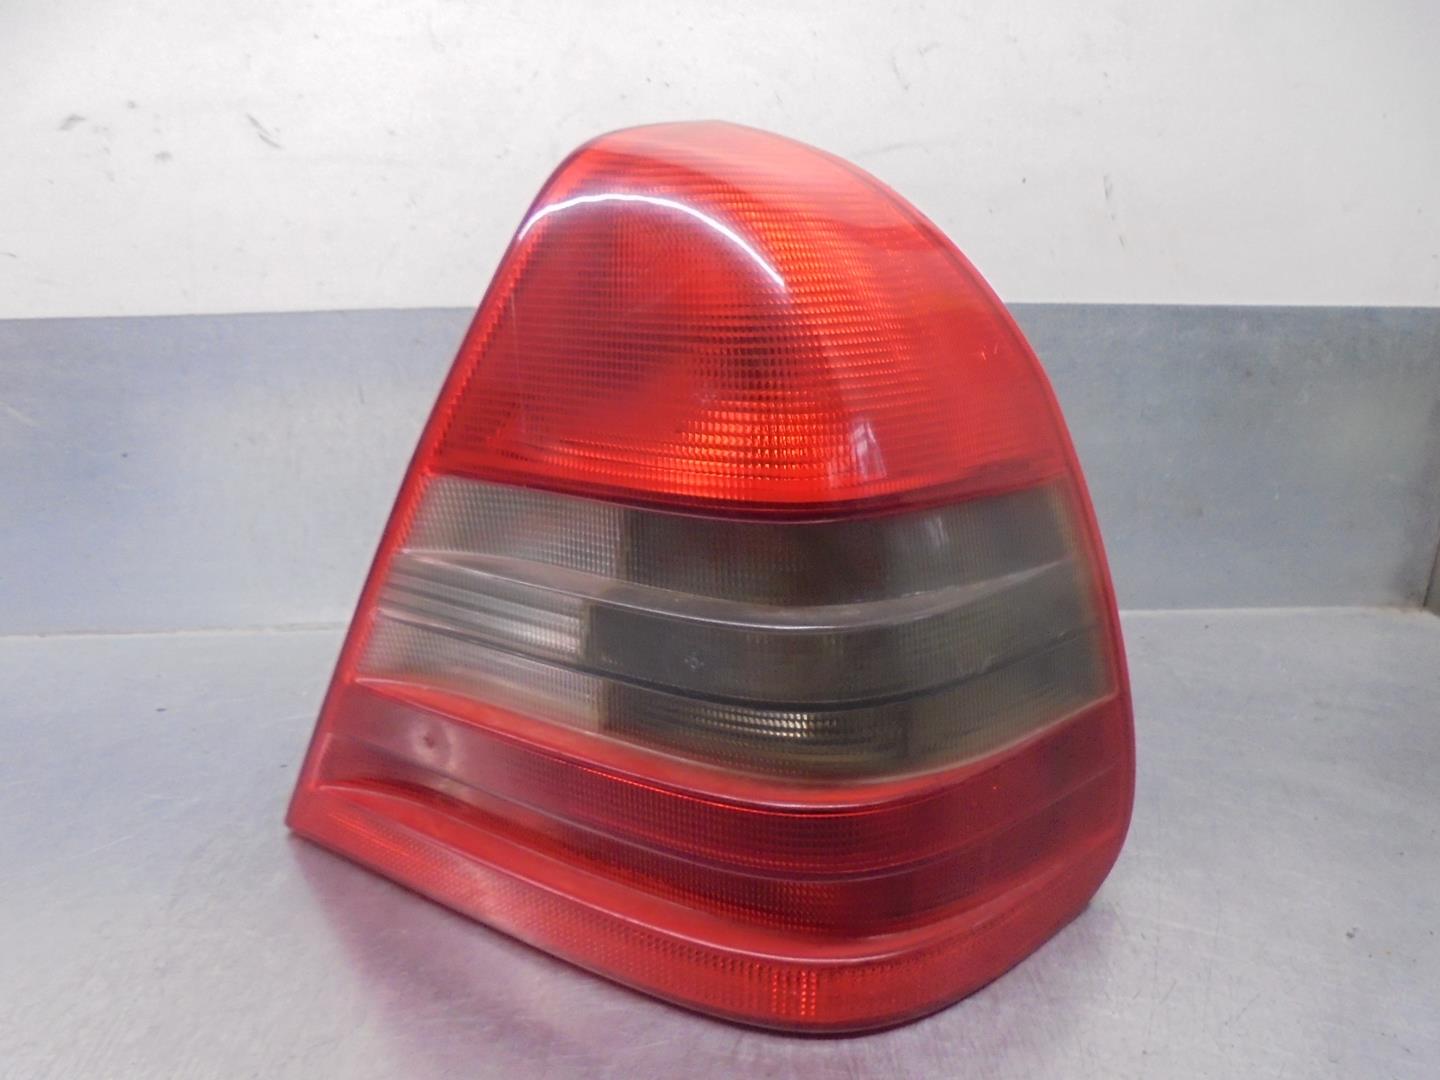 MERCEDES-BENZ C-Class W202/S202 (1993-2001) Rear Right Taillight Lamp 2028201264, A2028201264, 4PUERTAS 24208697